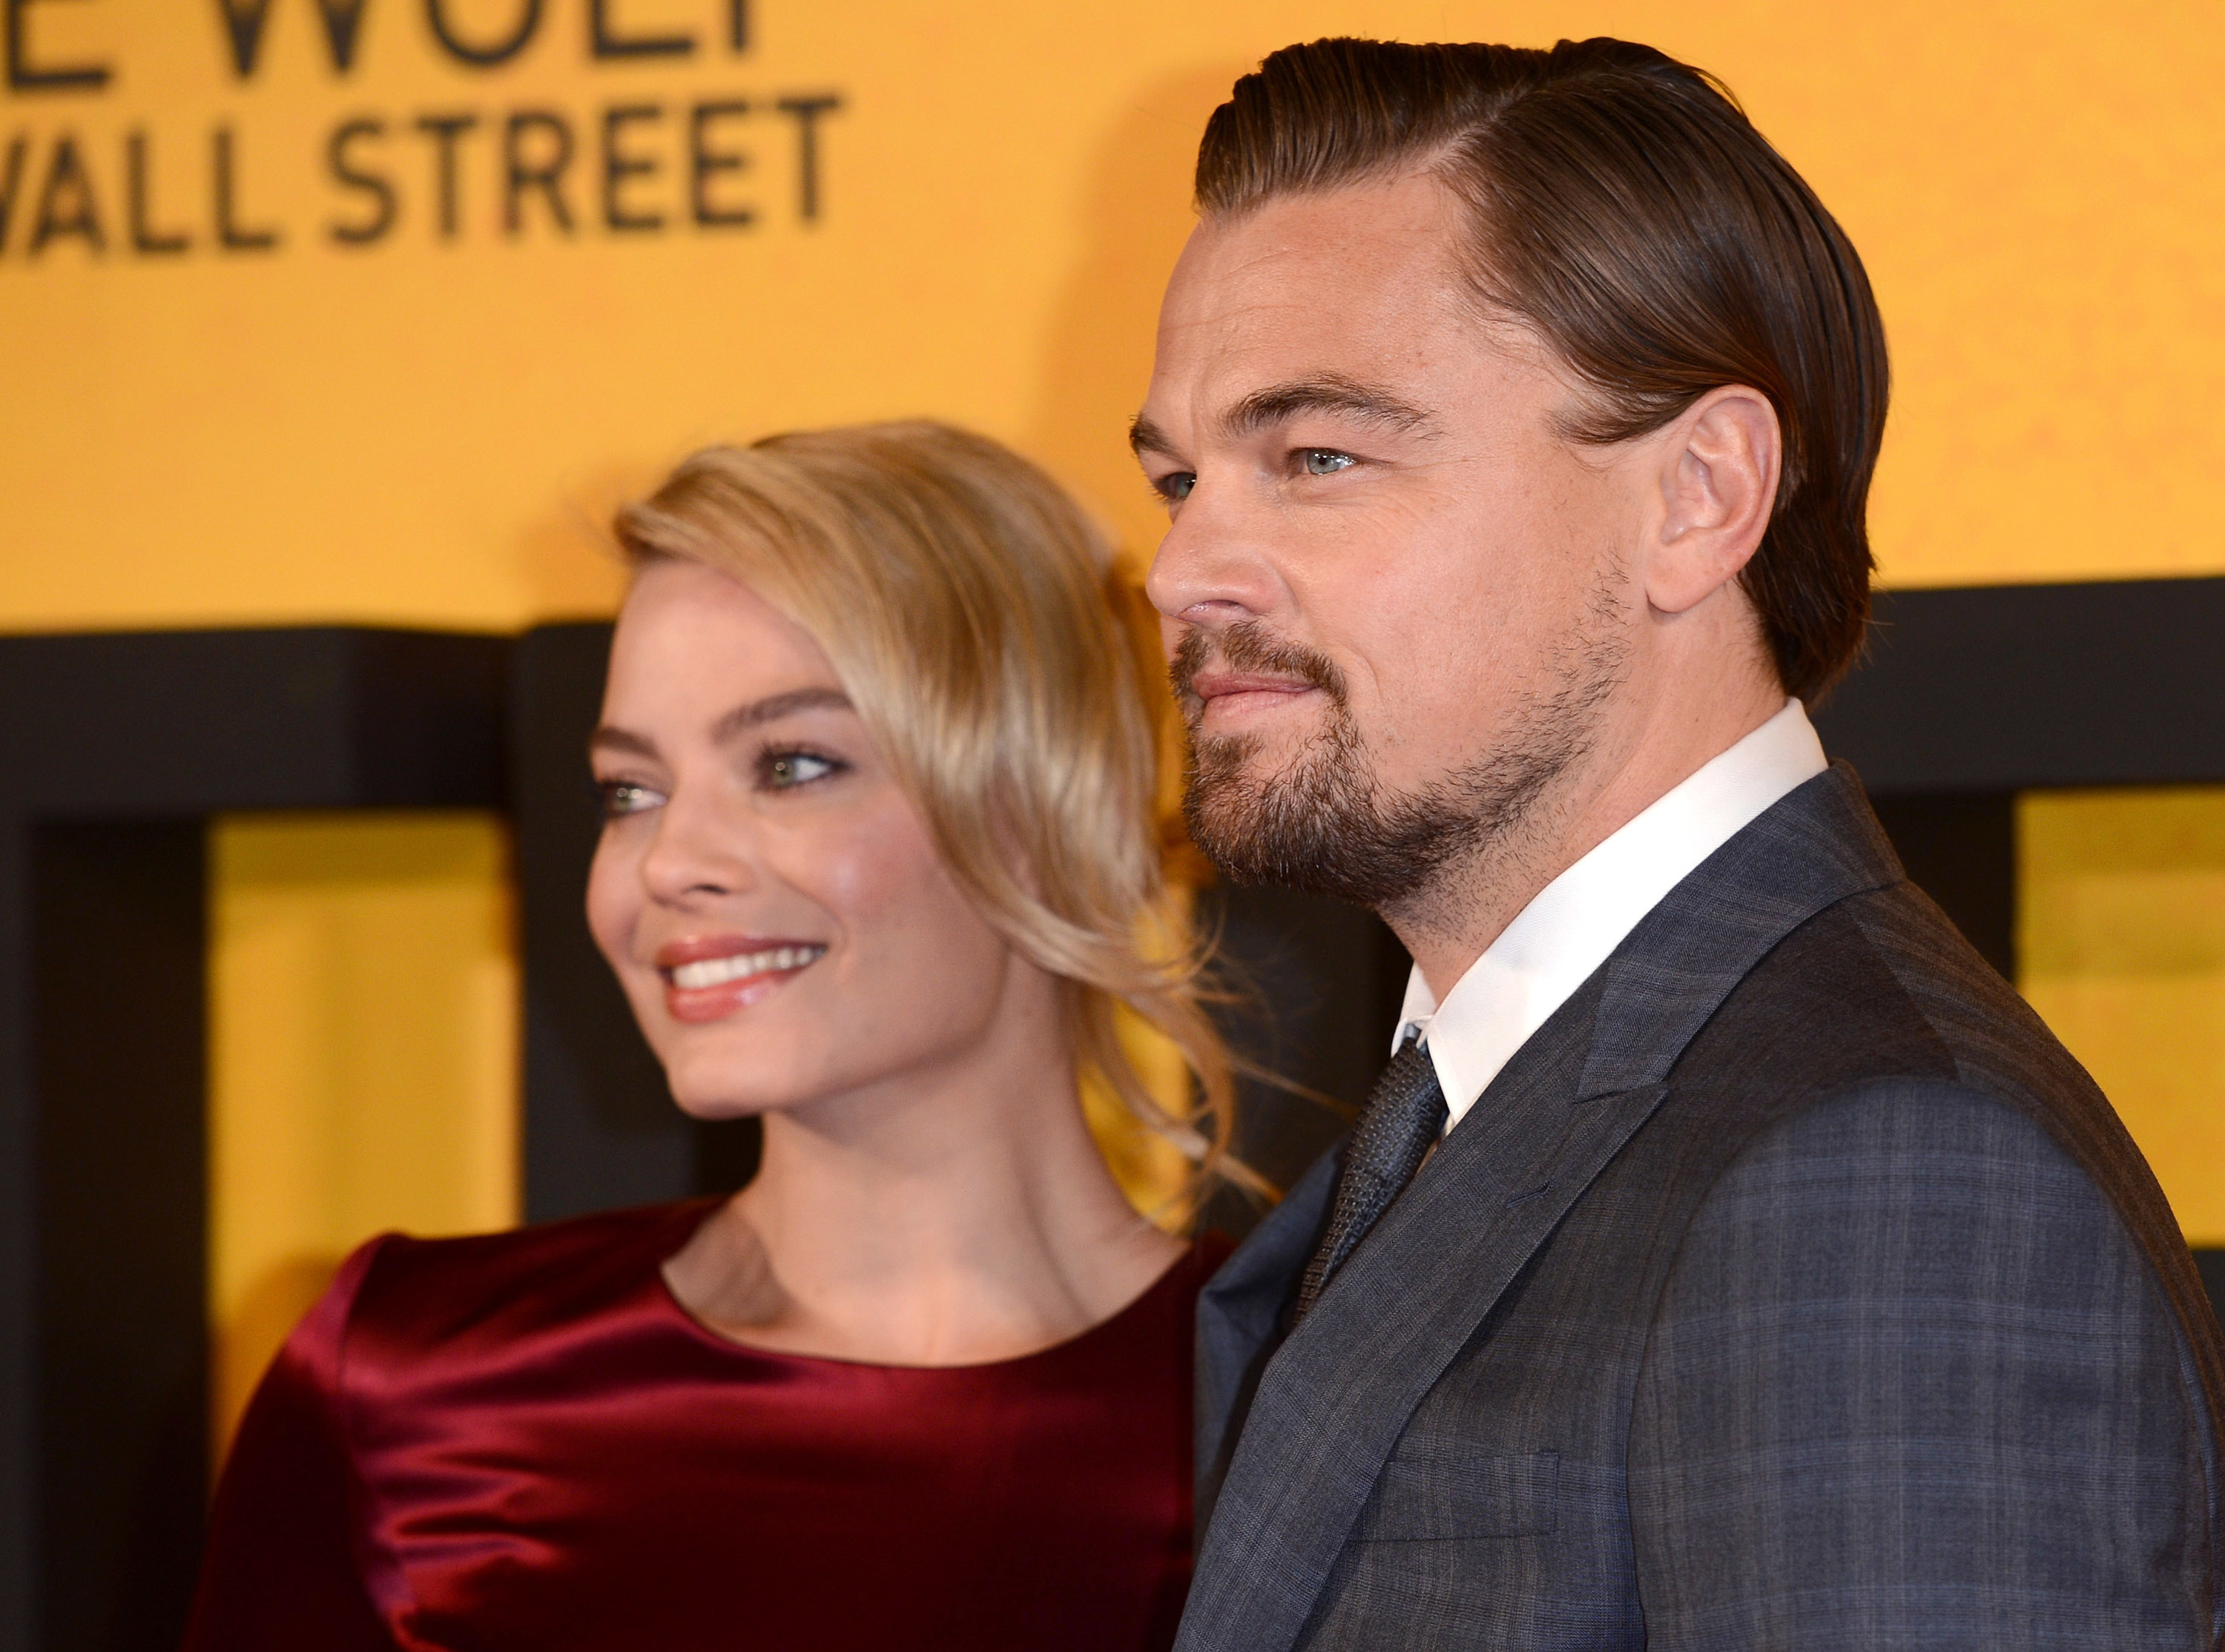 Close-up of Margot and Leo at a media event